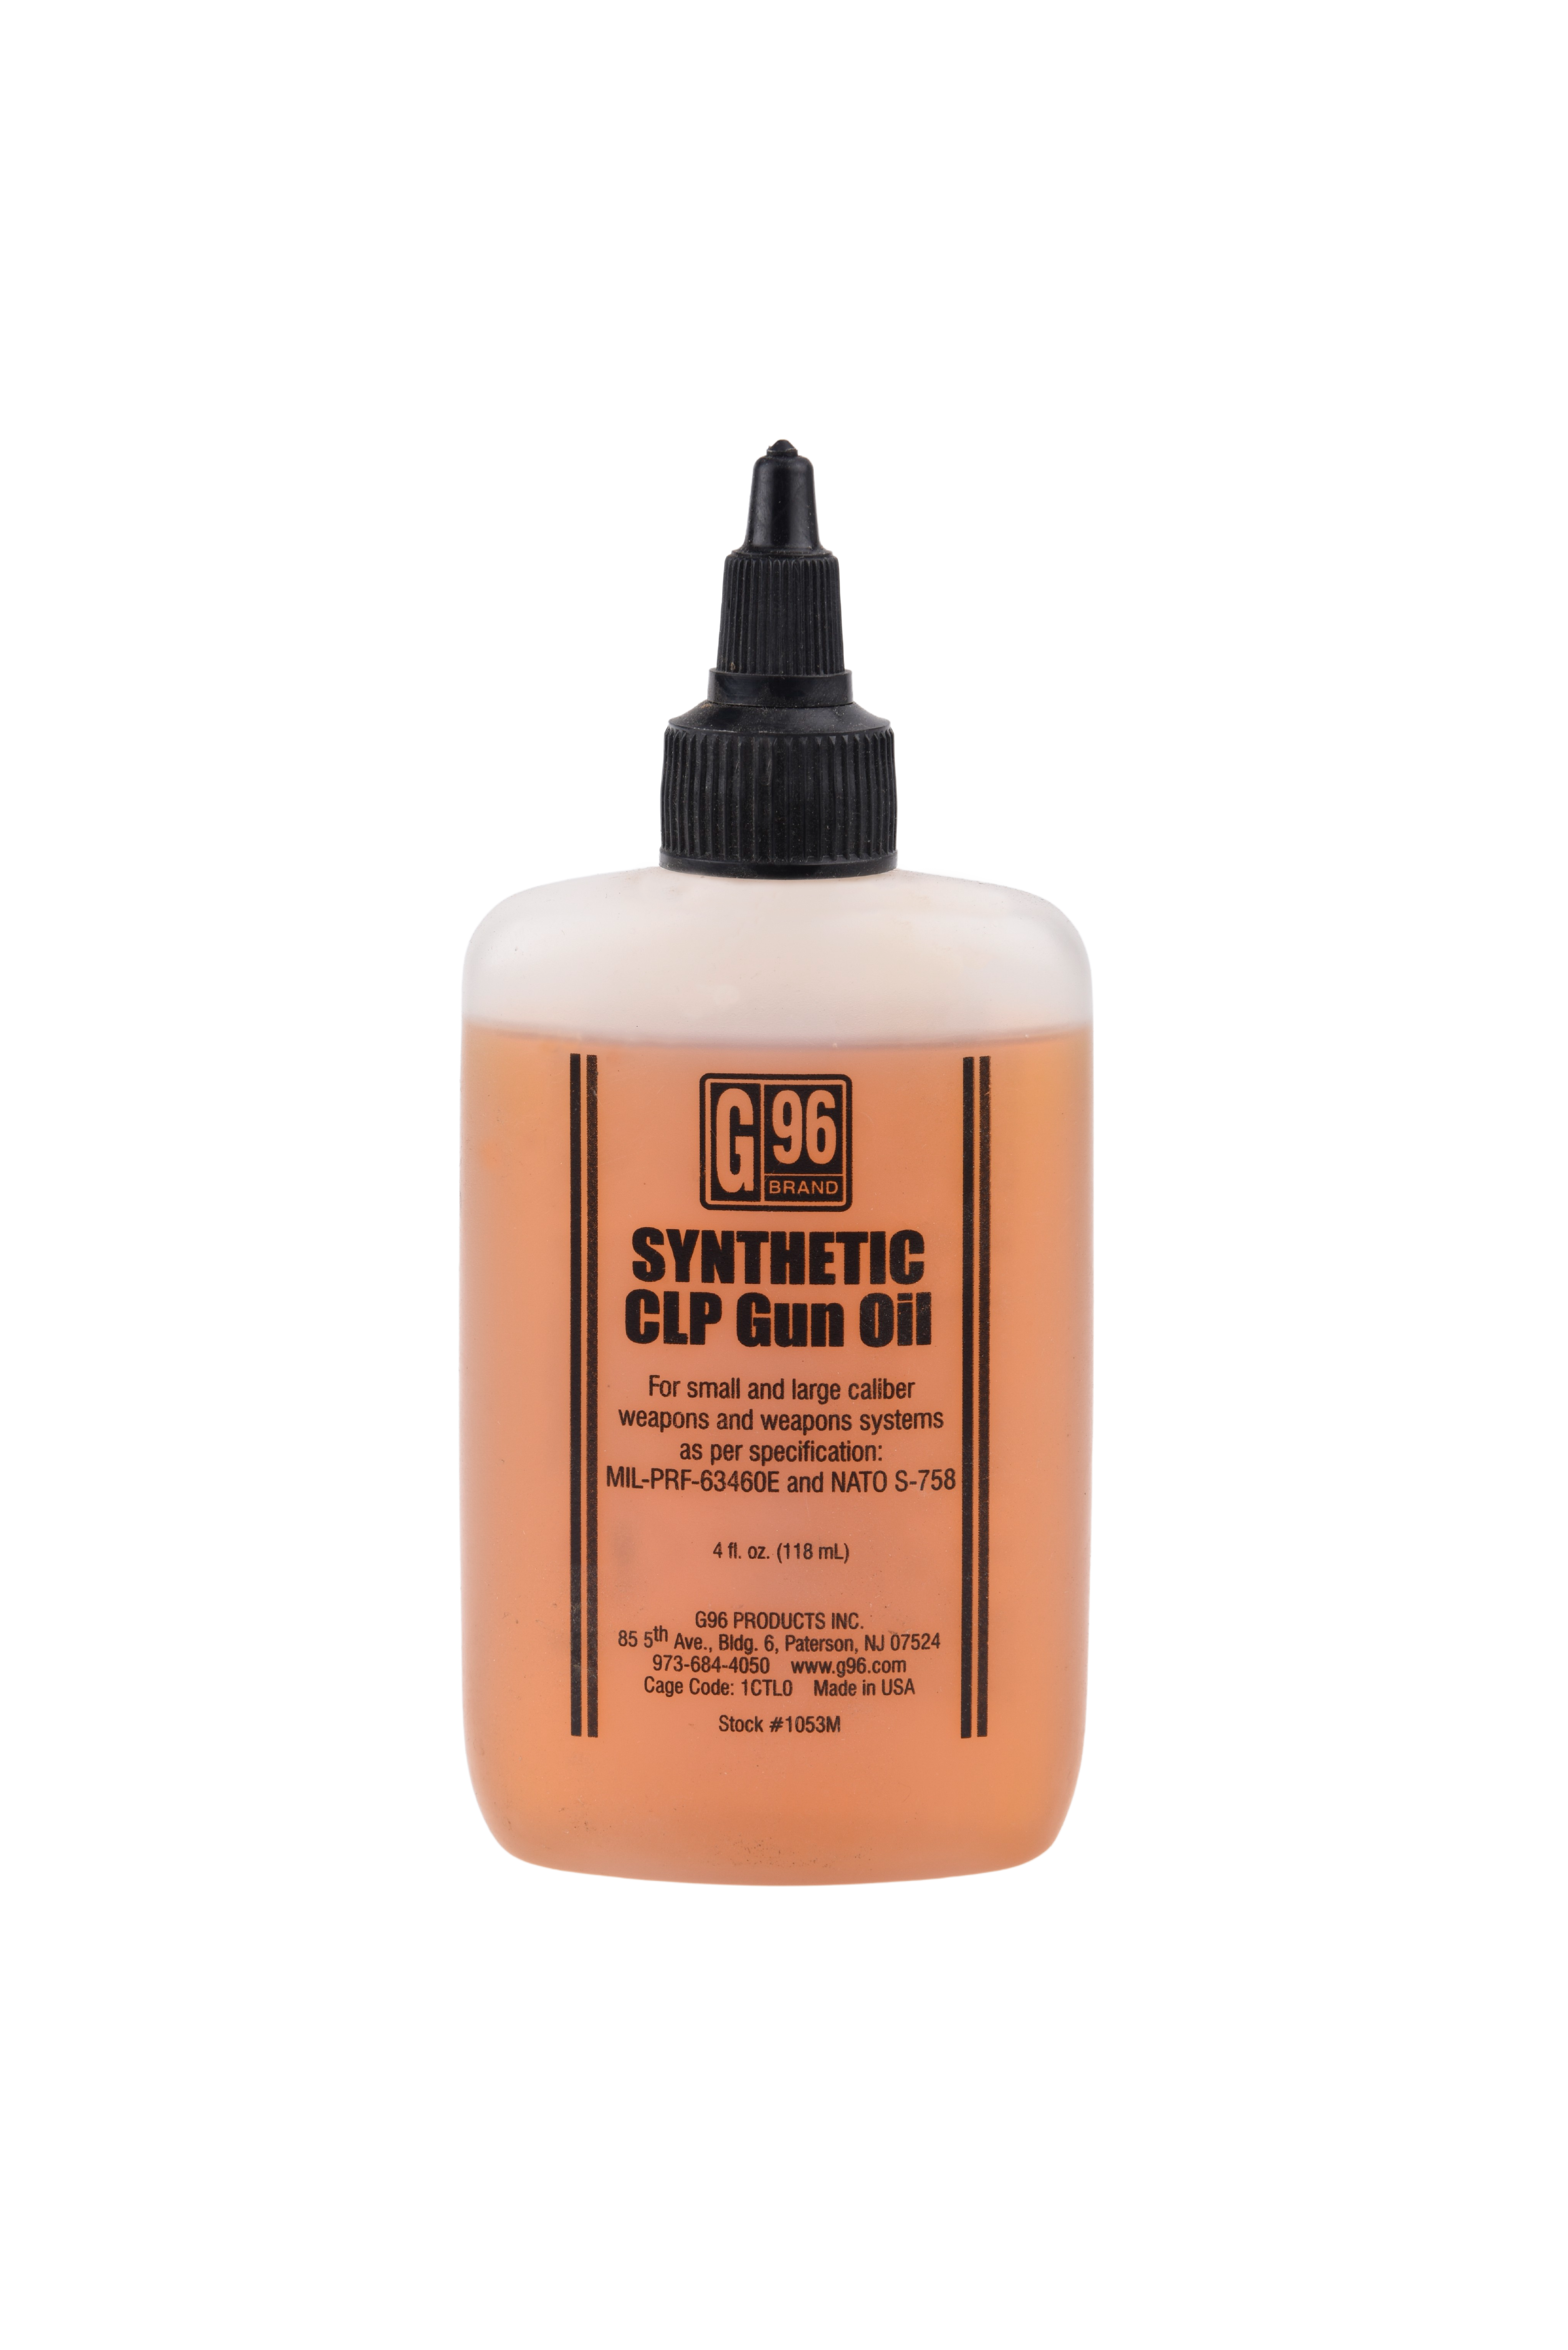 Military Approved Synthetic CLP Gun Oil – G96 Products Inc., Gun Oil 